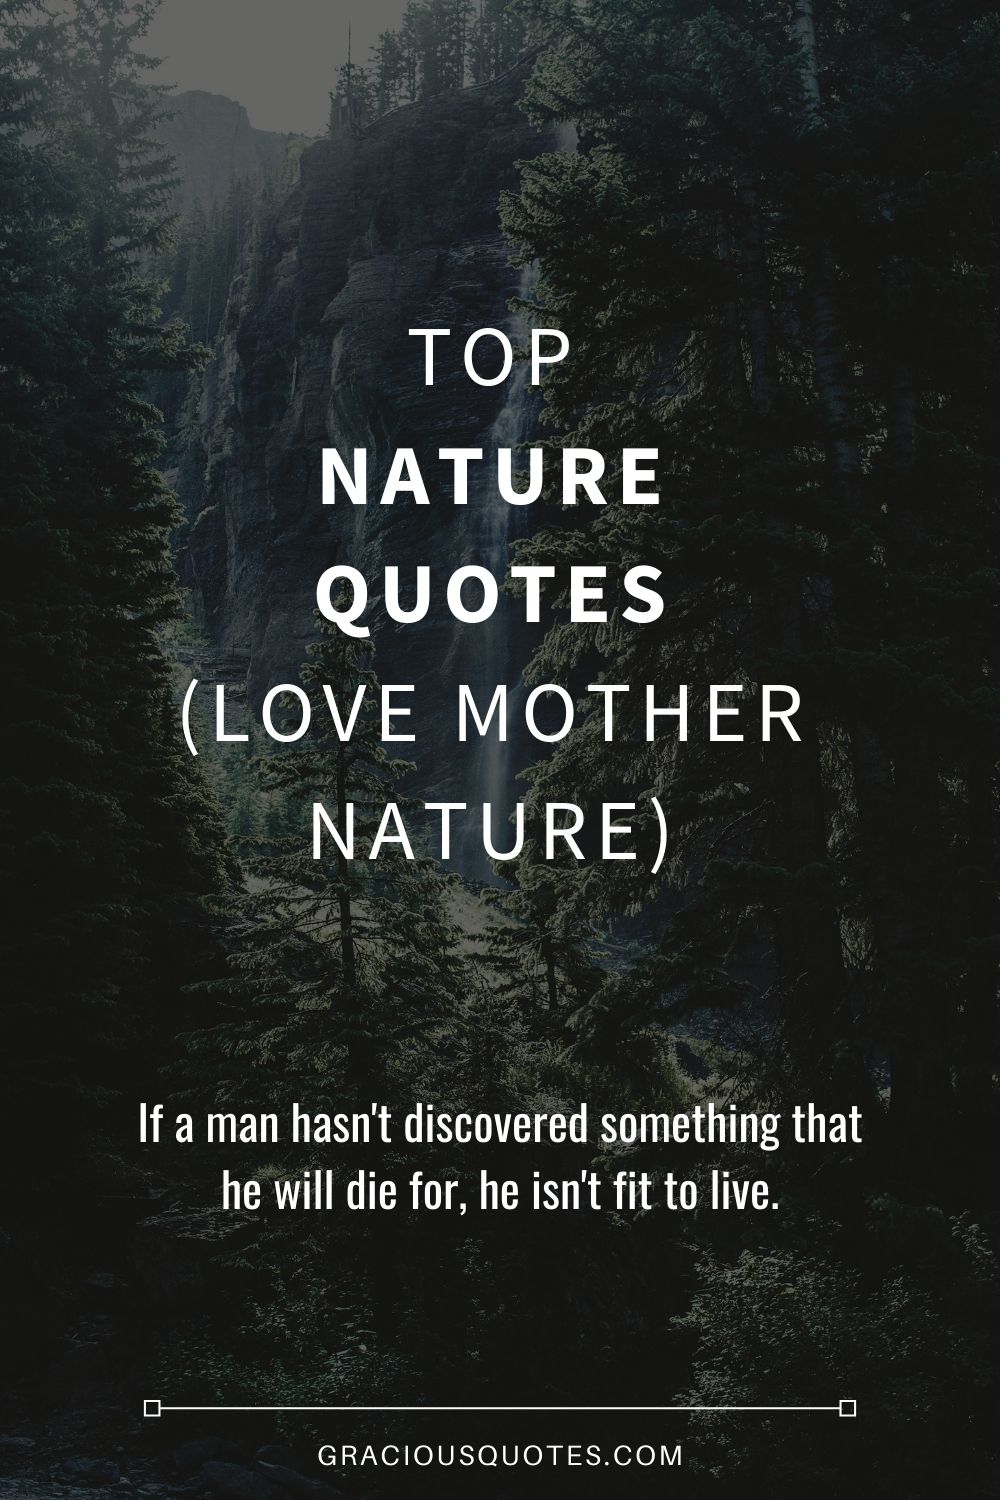 Top Nature Quotes (LOVE MOTHER NATURE) - Gracious Quotes